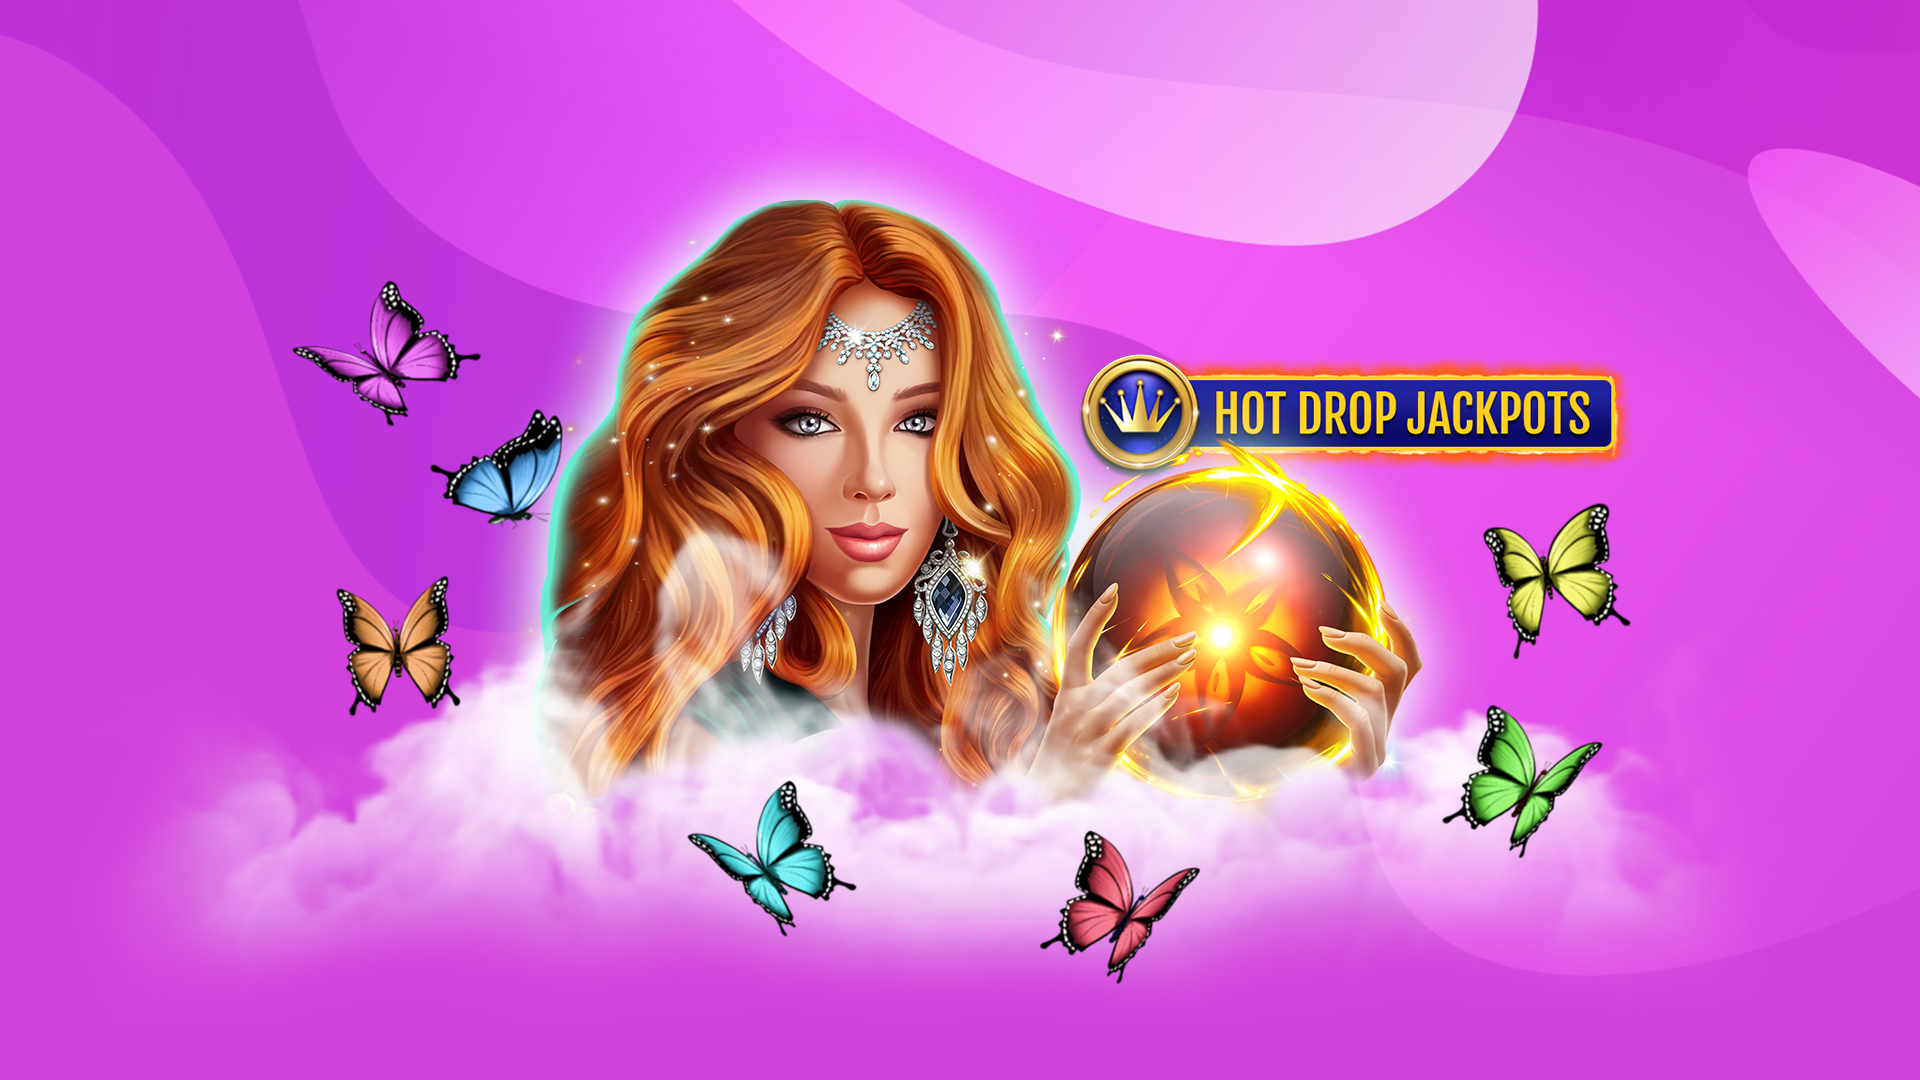 A woman with long red hair is holding an orange crystal ball as butterflies flutter around her head, and words say ‘Hot Drop Jackpots’ to her right, all with a purple background.